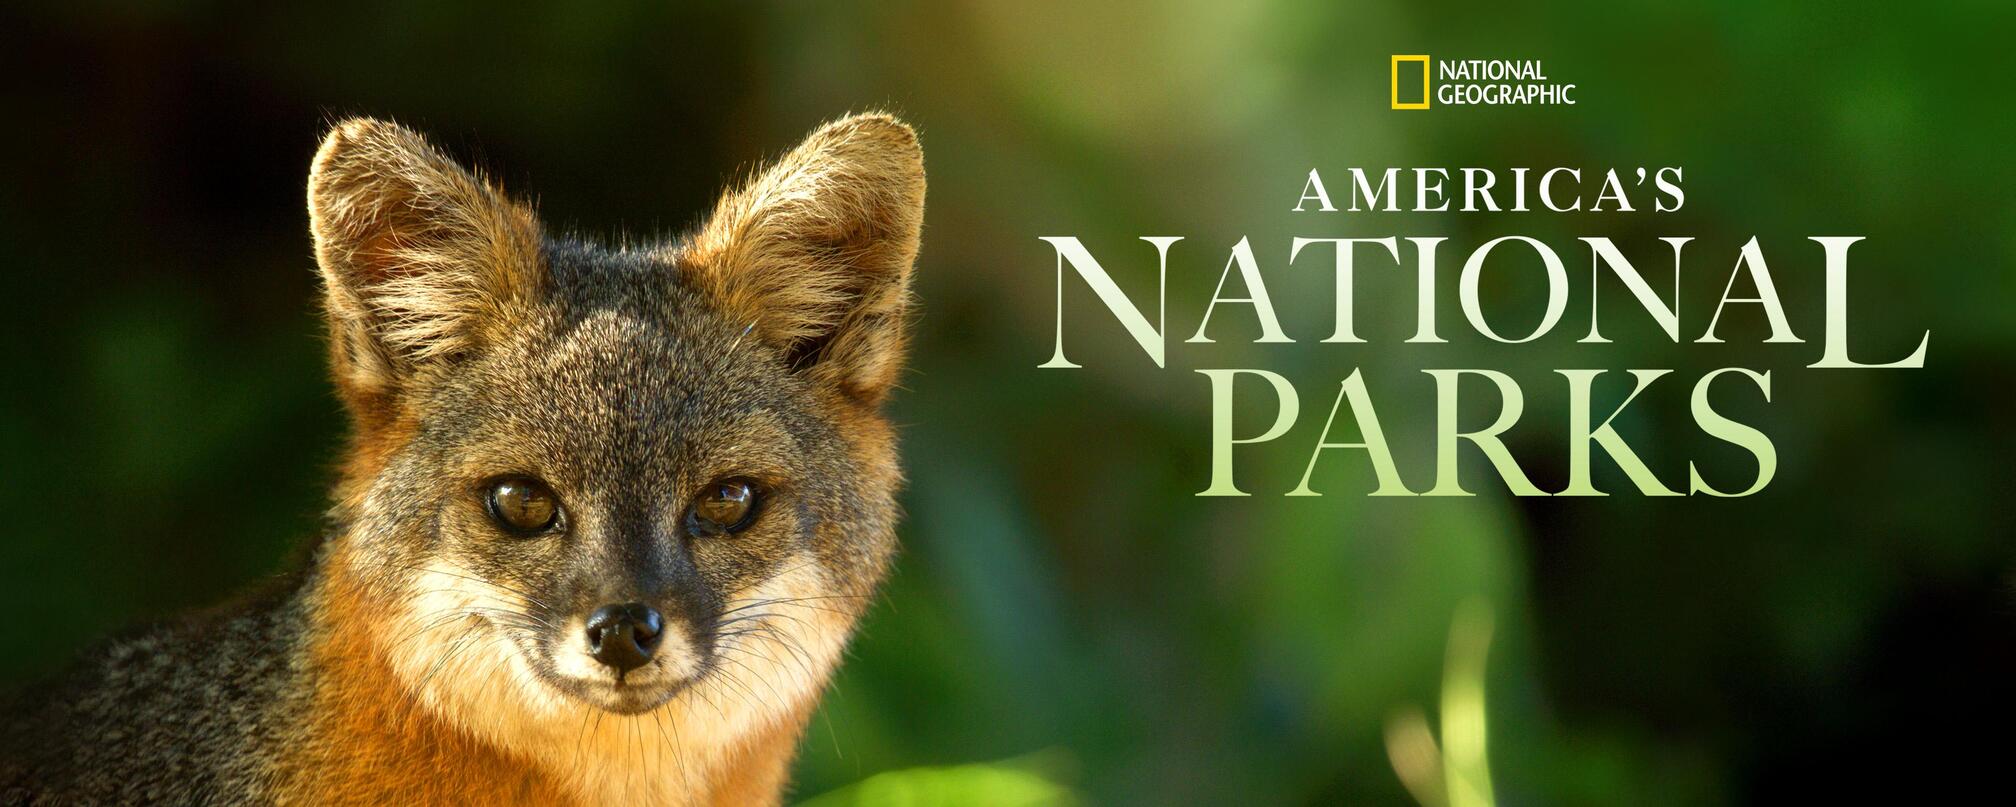 Watch America's National Parks TV Show - Streaming Online